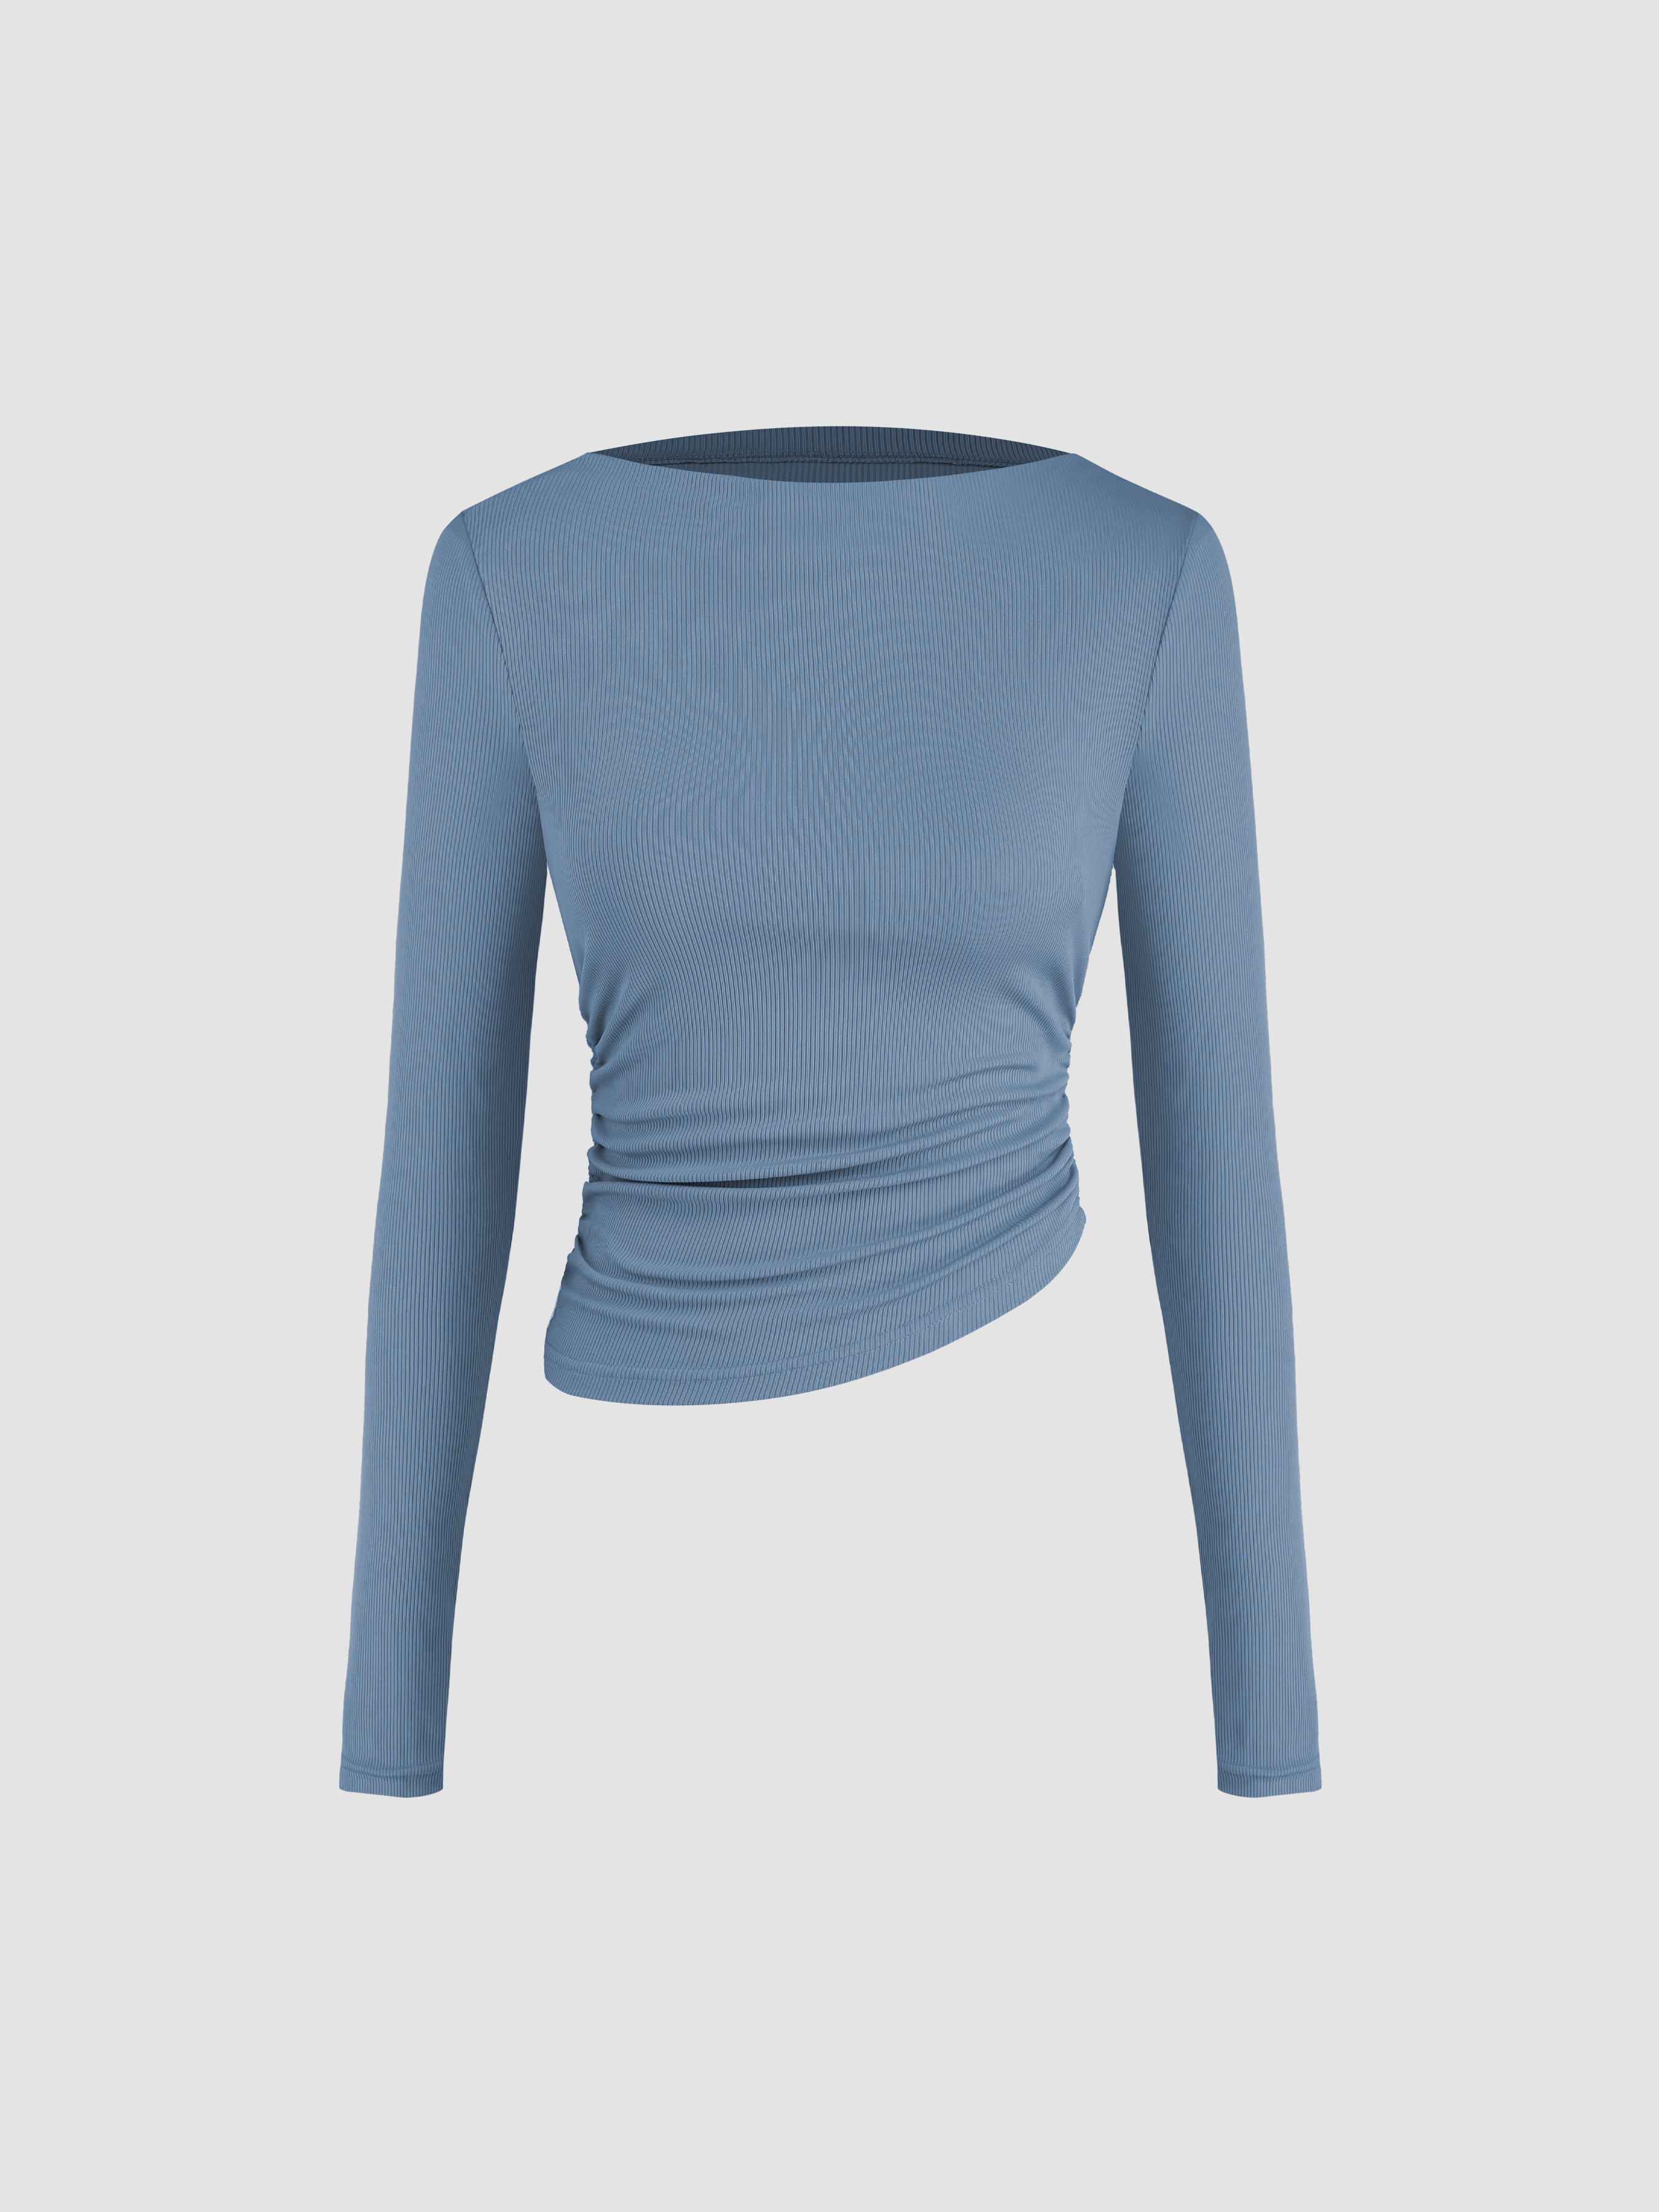 Asymmetrical Neck Ruched Long Sleeve Tee